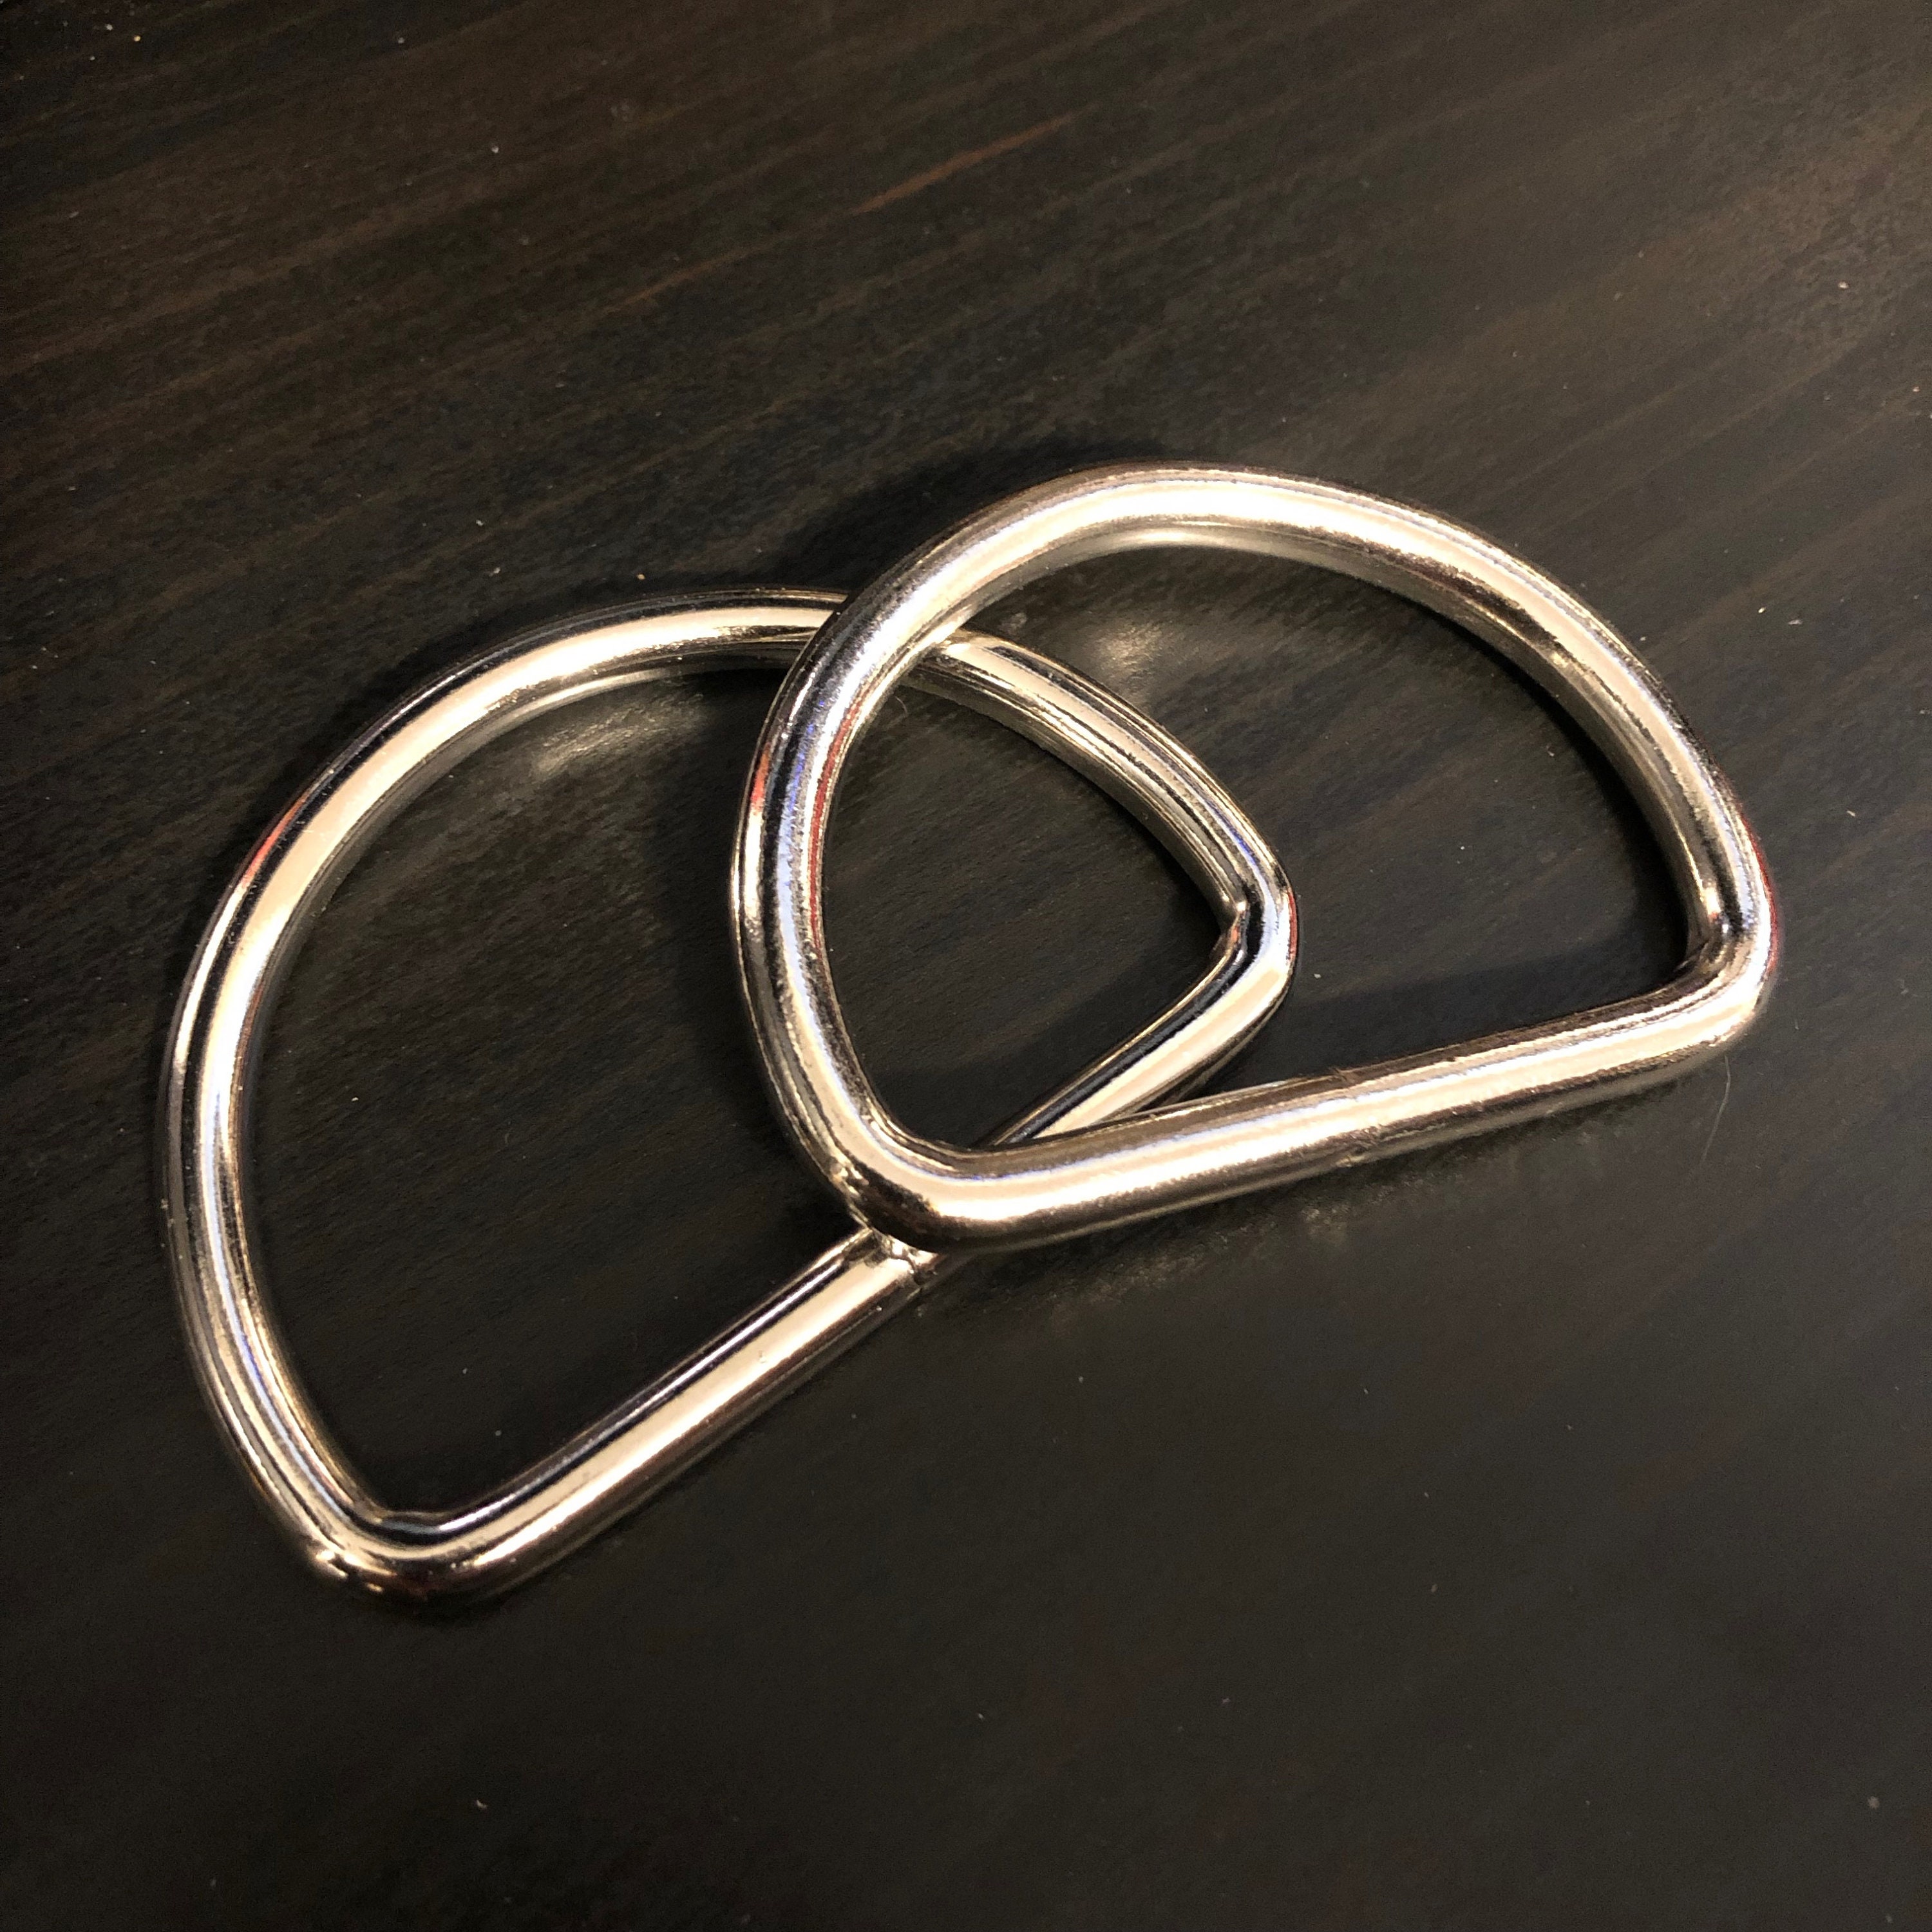 Fashionable 1 inch metal d ring from Leading Suppliers 